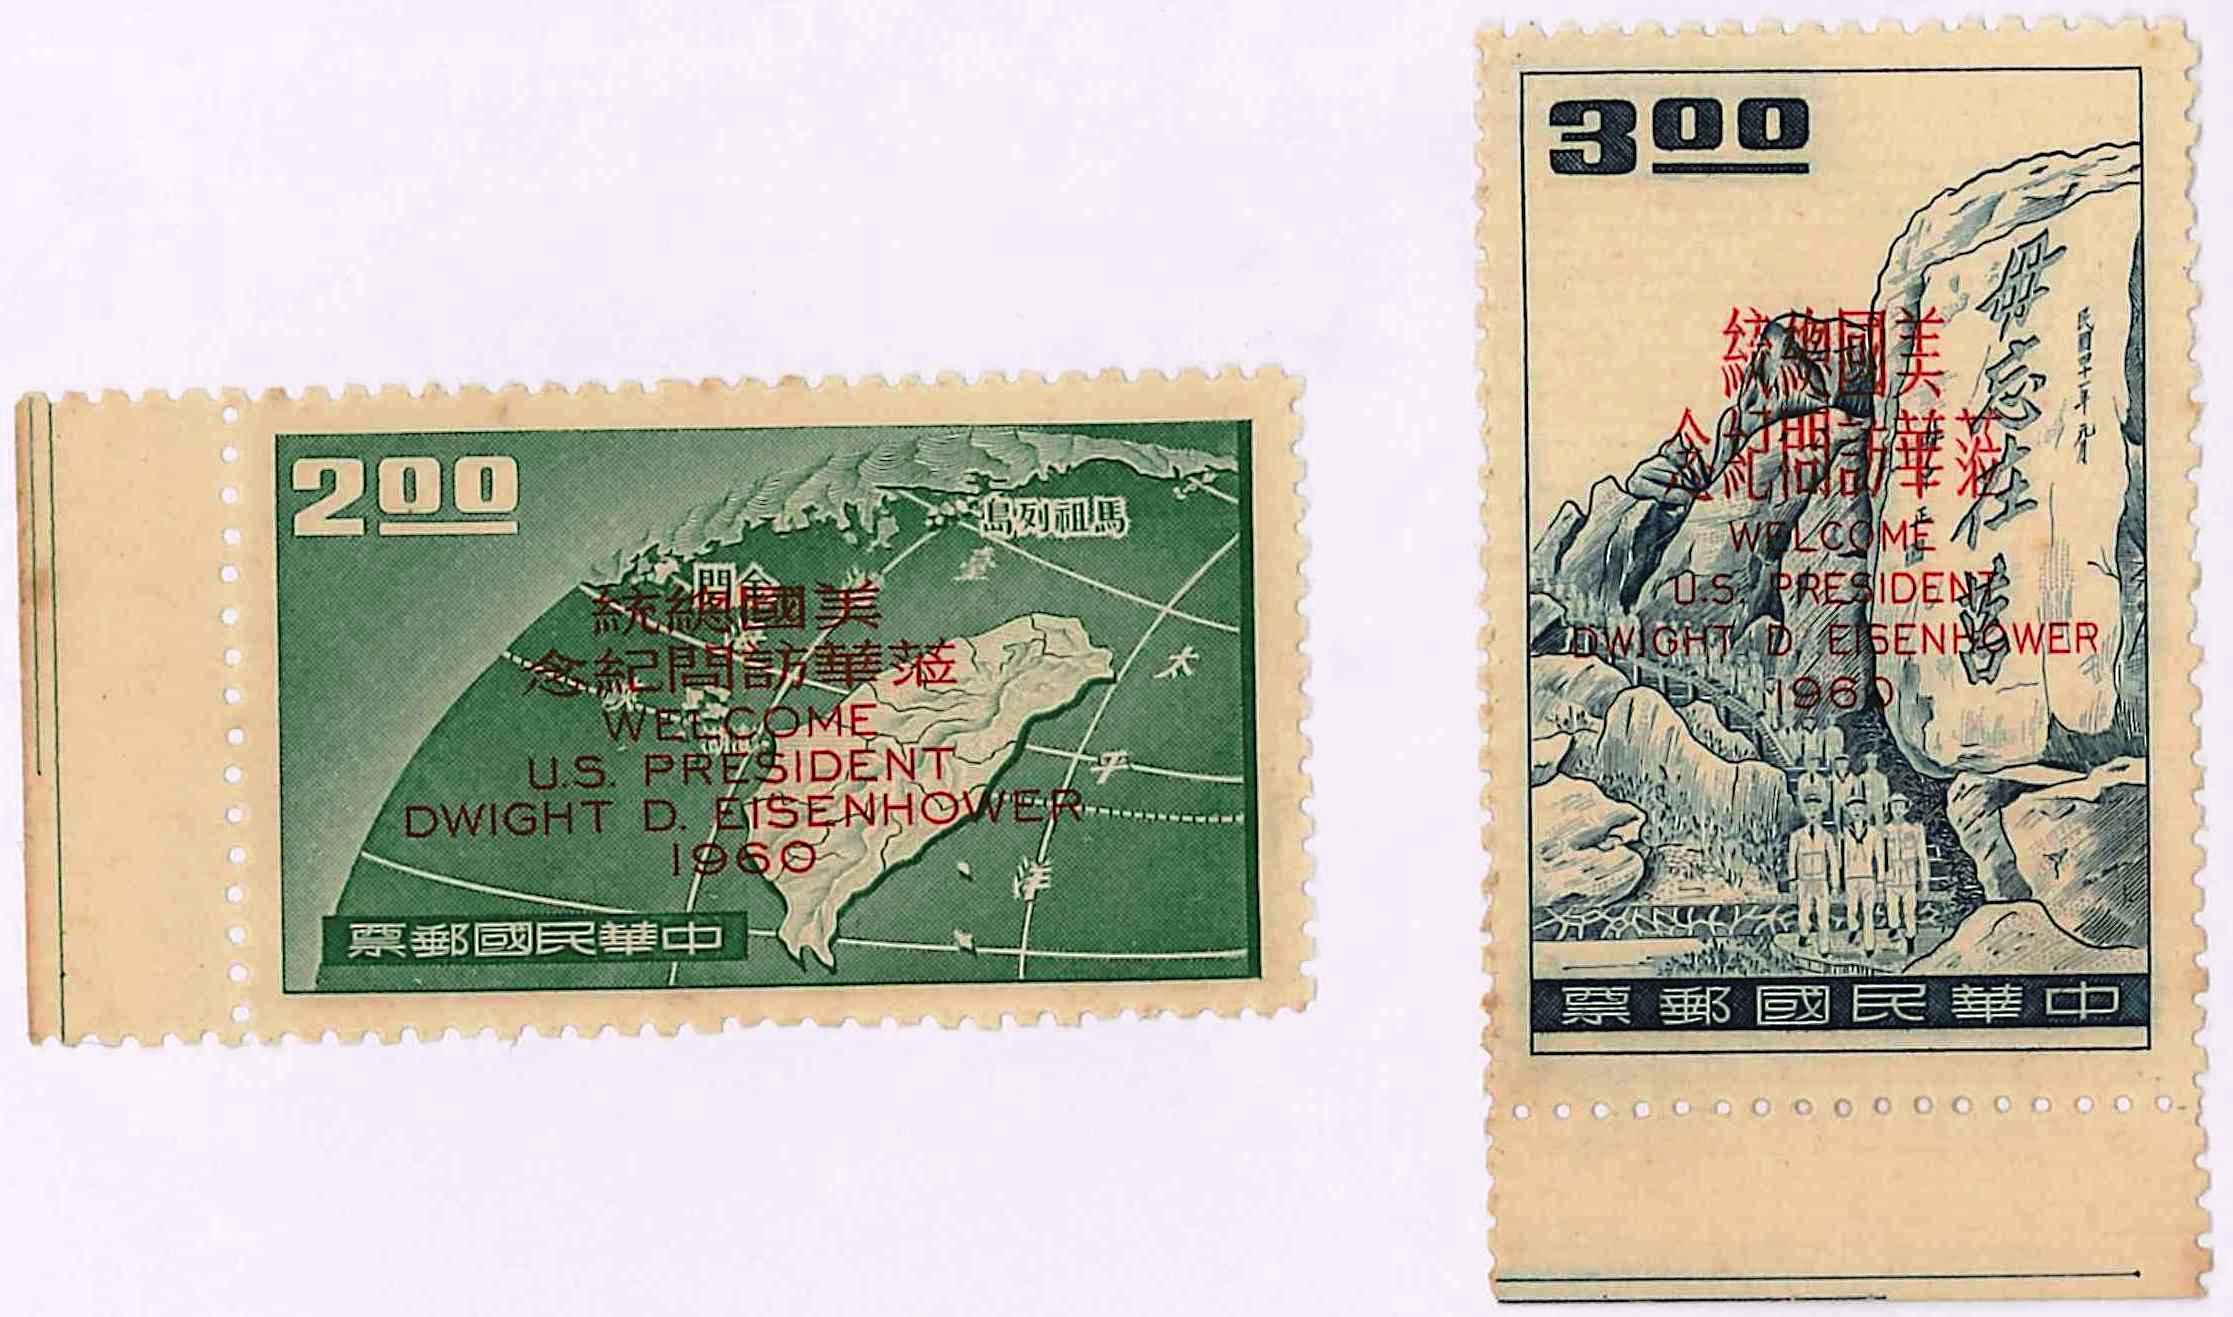 The President Dwight D. Eisenhower of United States Visiting Taiwan Postage Stames